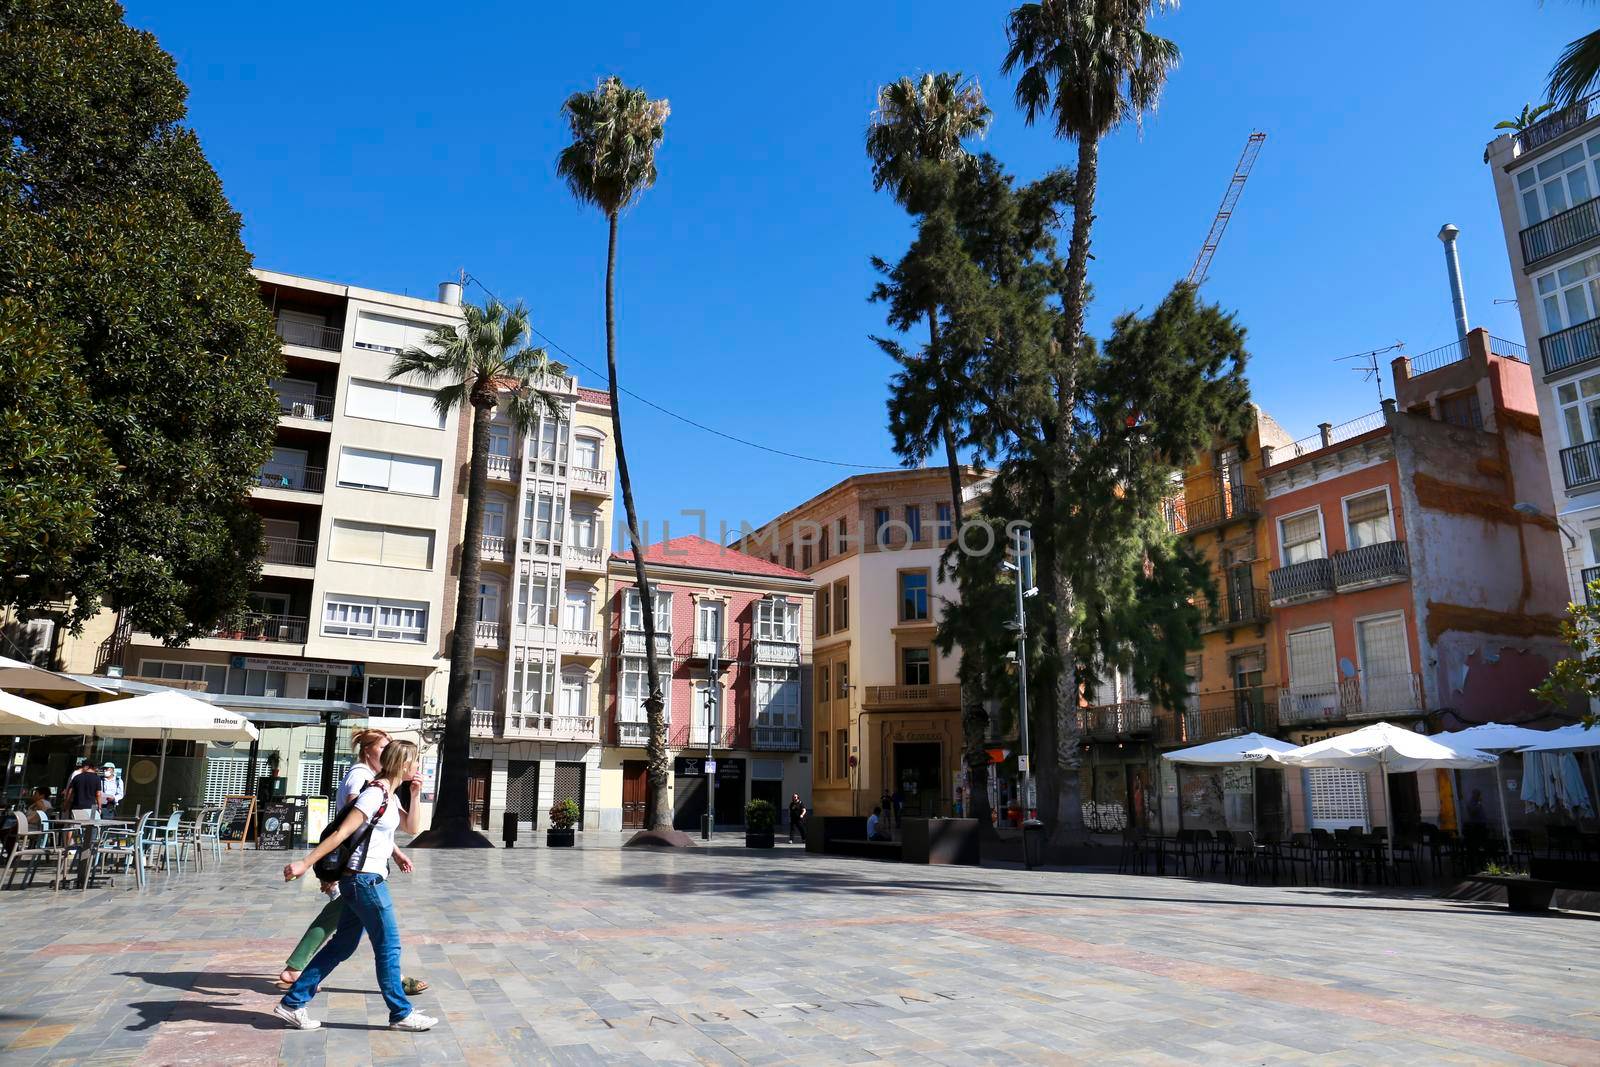 Cartagena, Murcia, Spain- July 17, 2022: Beautiful San Francisco Square in Cartagena on a sunny day of summer